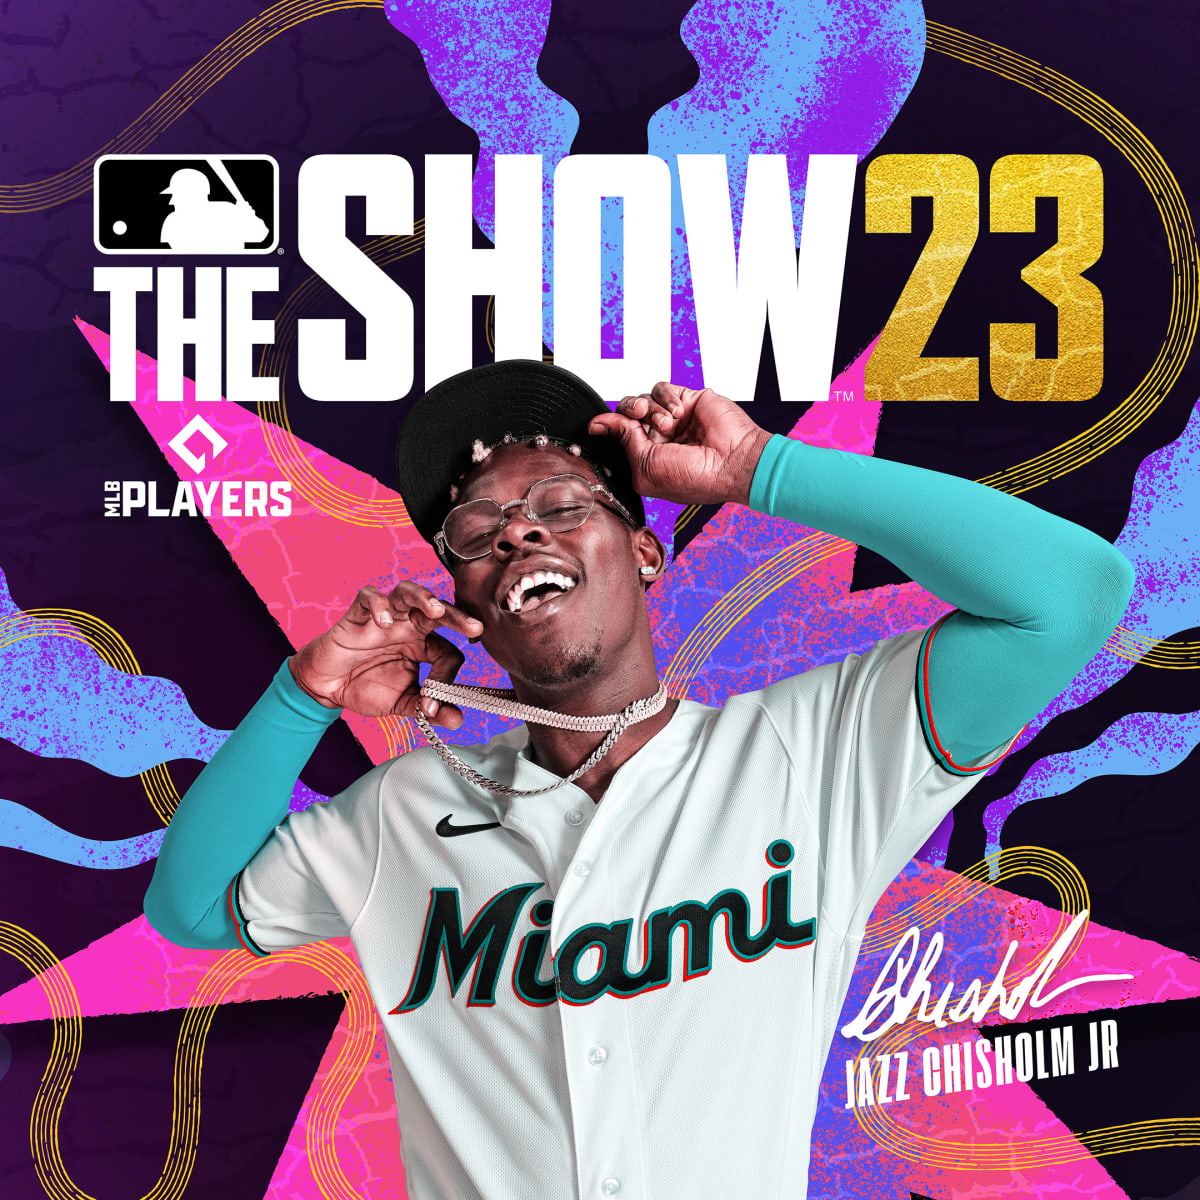 MLB The Show 23 cover star Jazz Chisholm wants to change baseball